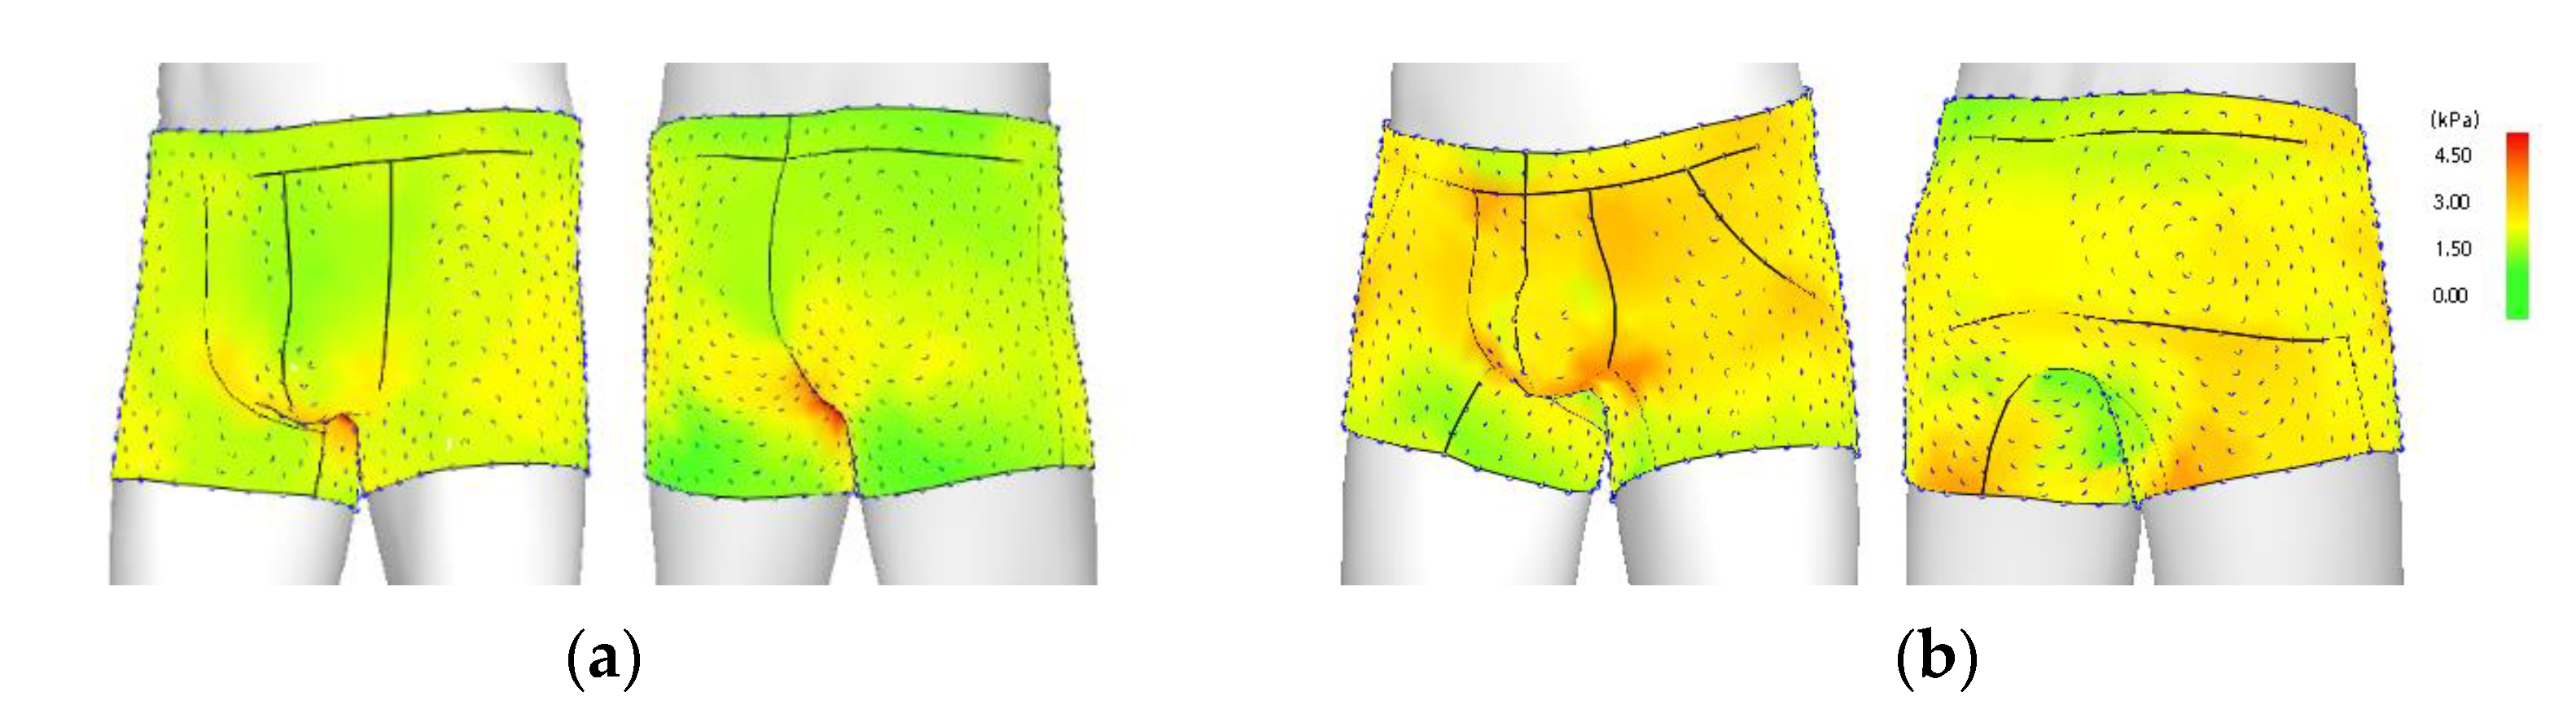 Sustainability | Free Full-Text | The Influence of Major Ergonomic Factors  on the Demand for Underwear in the Highly Educated Male Group | HTML